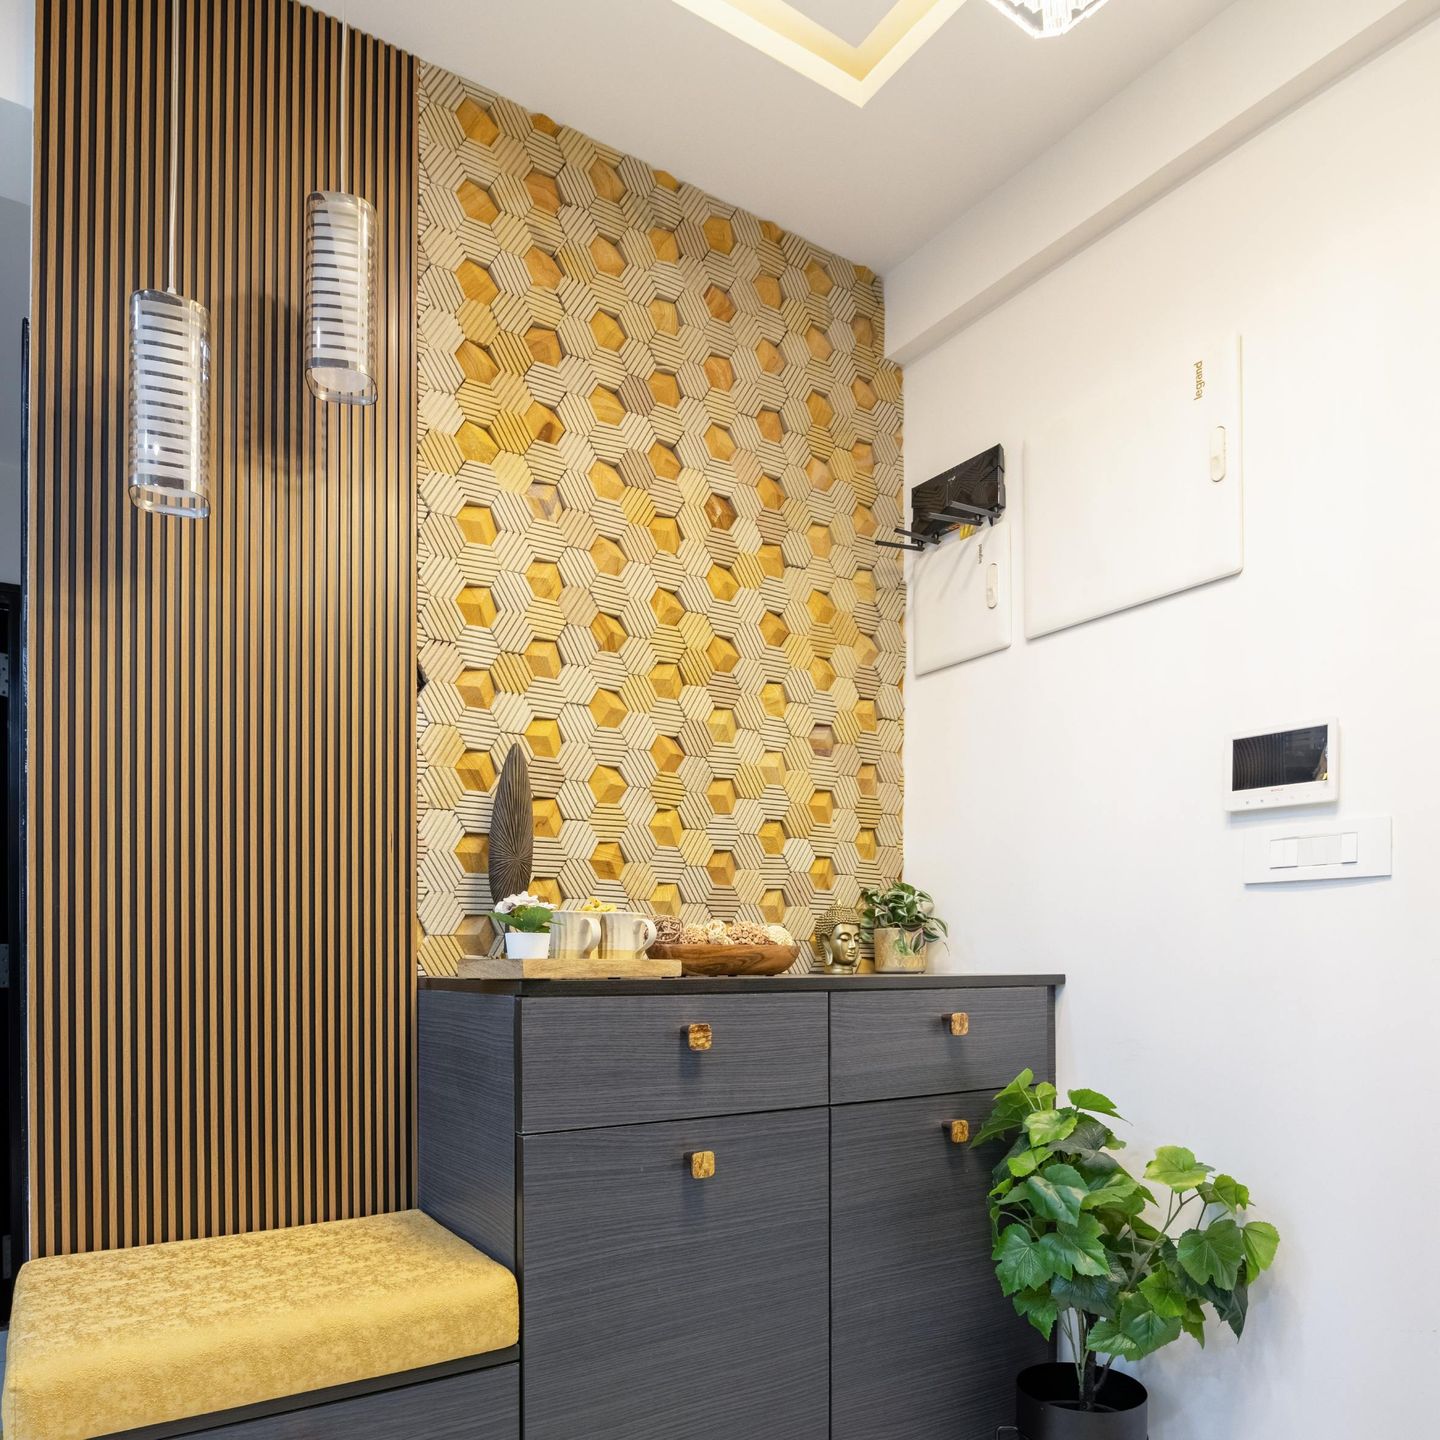 Modern Wall Design With Geometric Wall Panelling